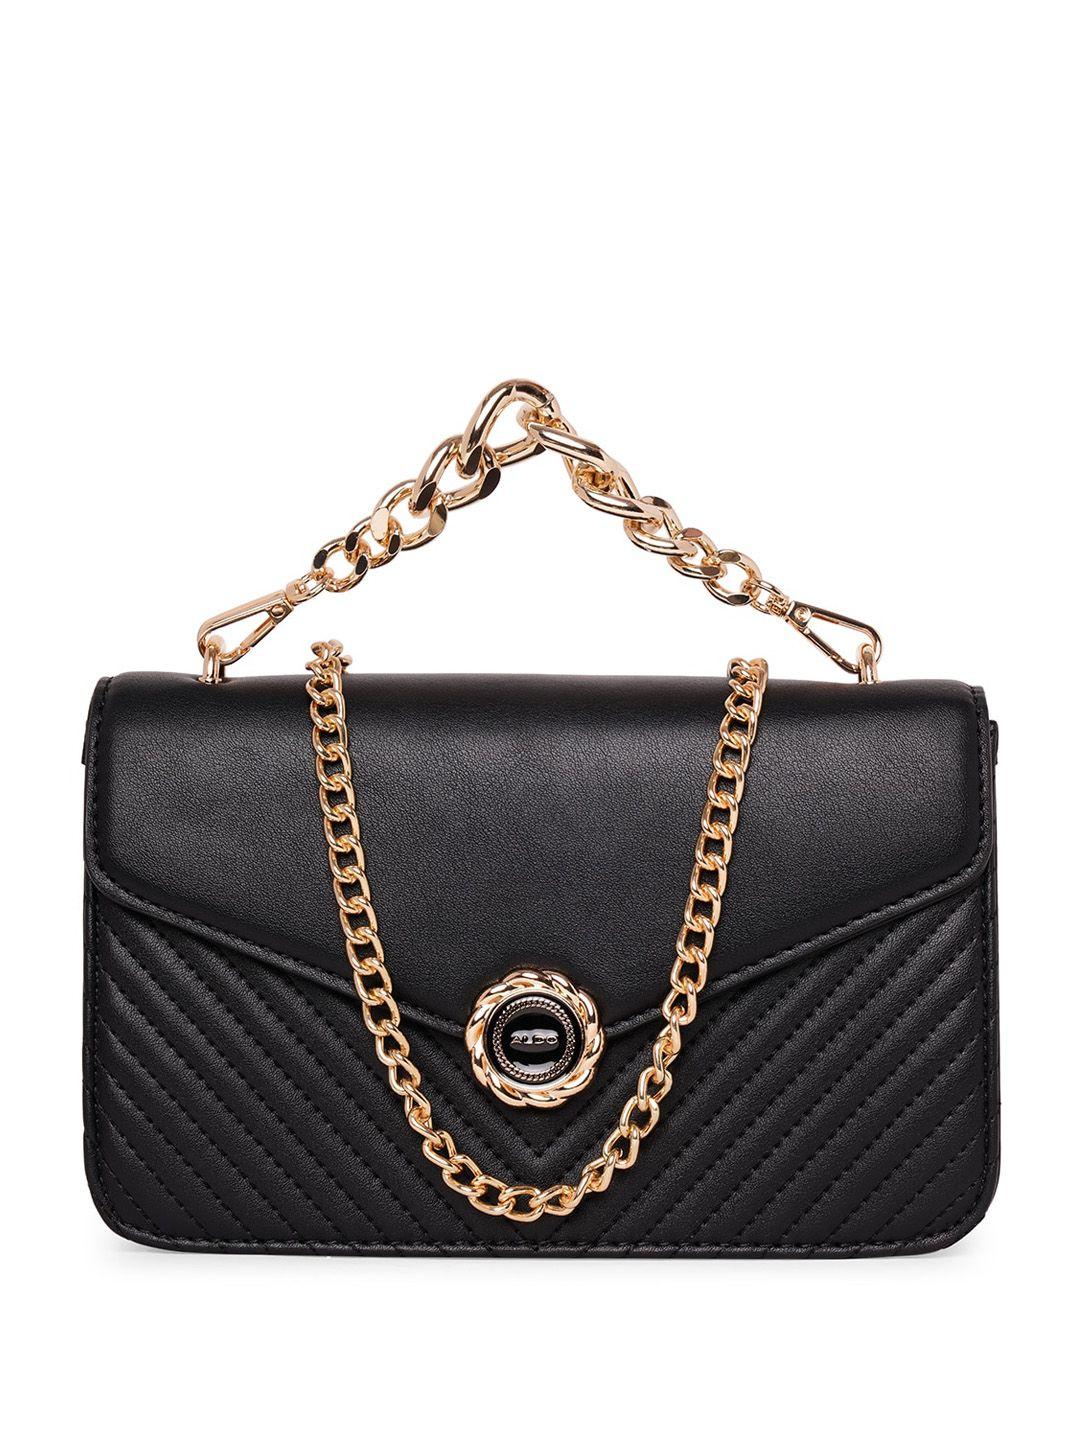 aldo structured sling bag with quilted